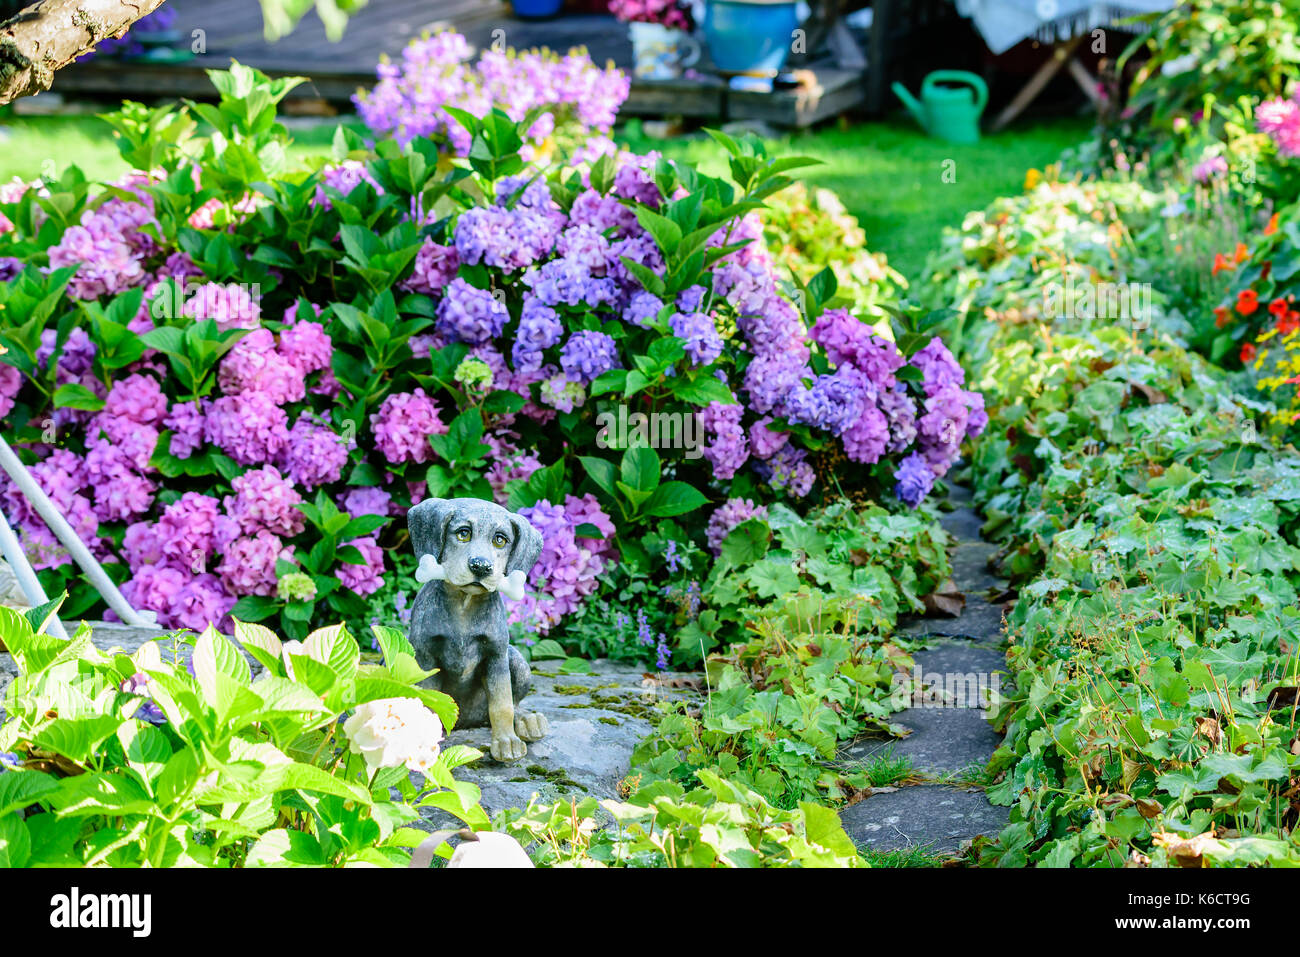 Karlskrona, Sweden - August 28, 2017: Travel documentary of city gardens. Detail of ornamental dog with bone in flowerbed. Stock Photo